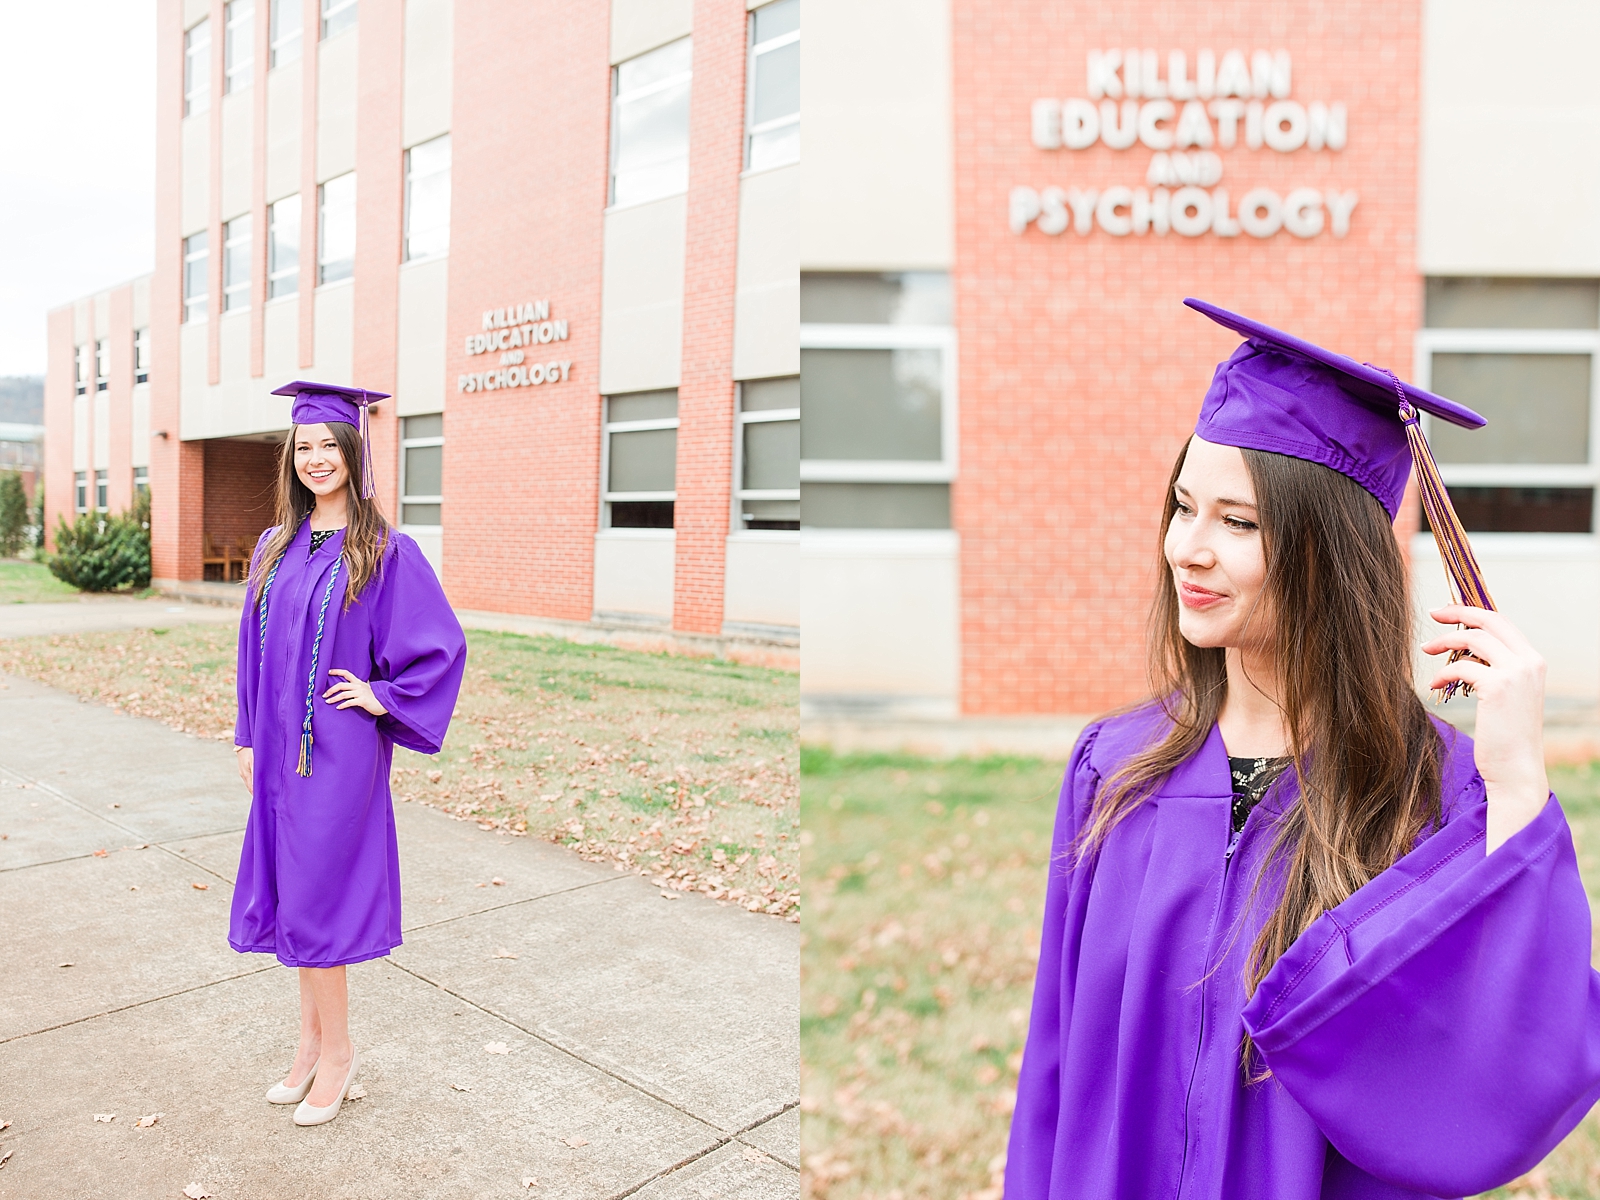 Western Carolina University Senior Sierra smiling and twirling her tassel in front of the Killian education and psychology building Photo